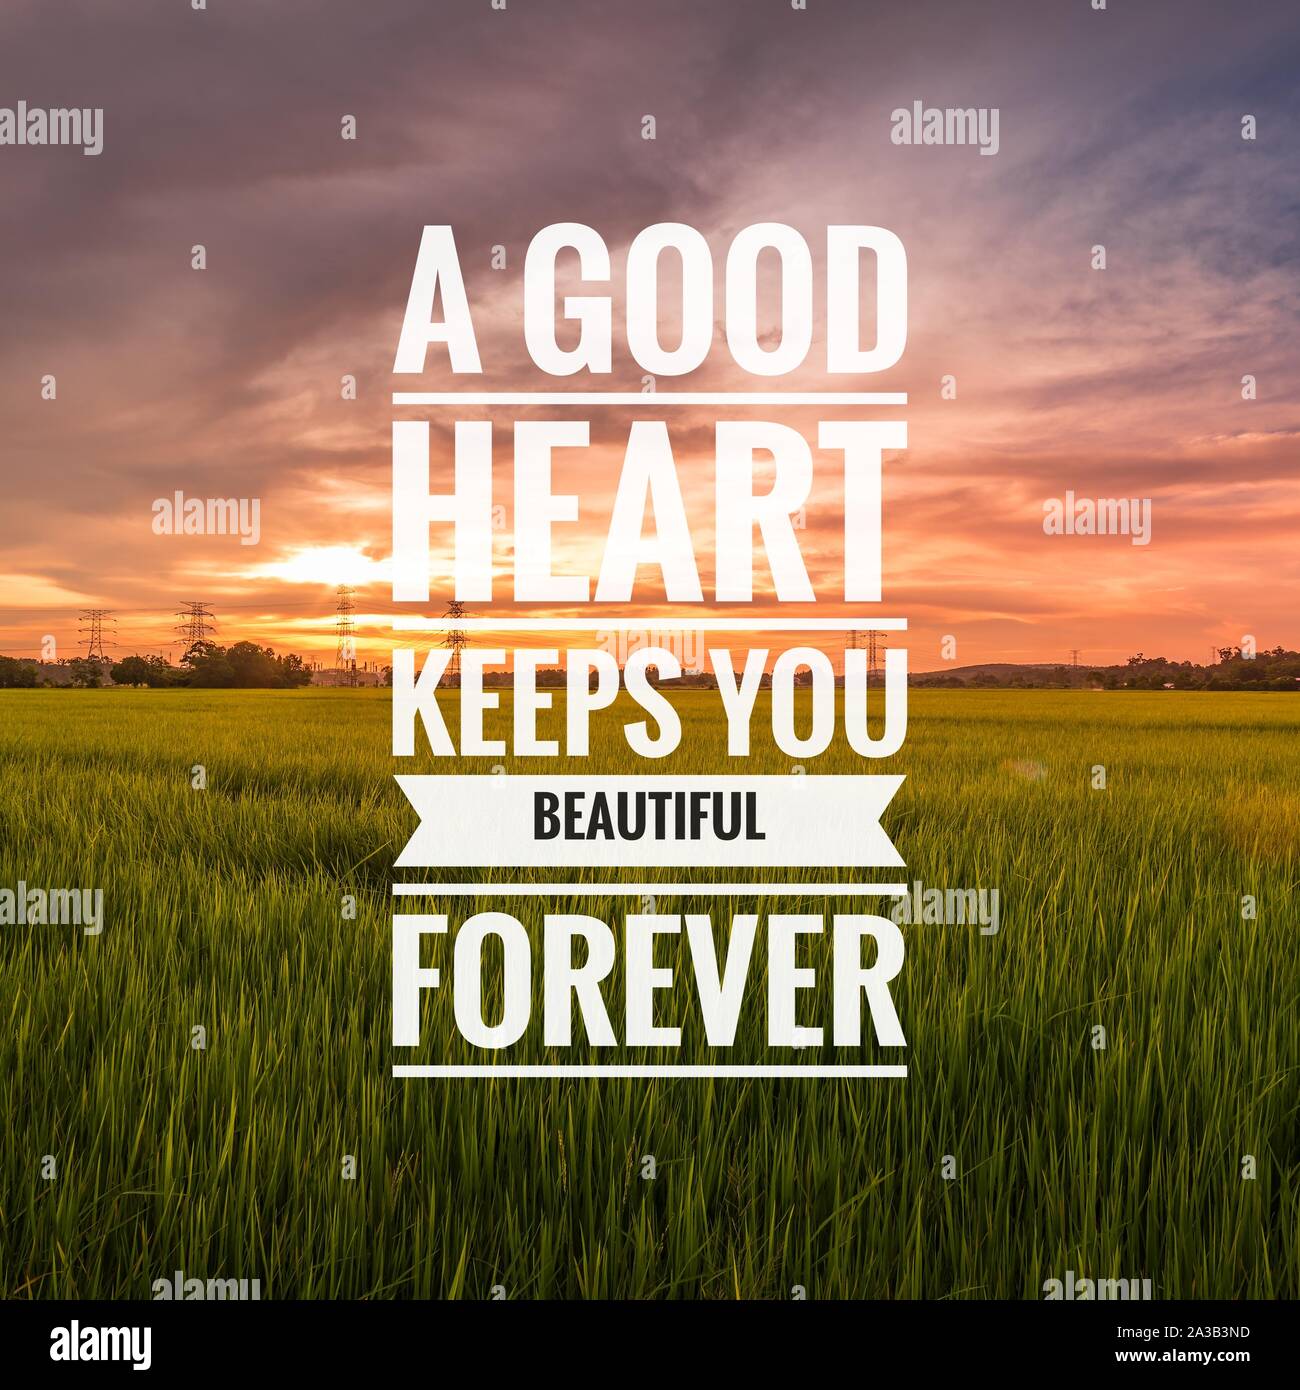 Motivational and inspirational quote - A good heart keeps you ...